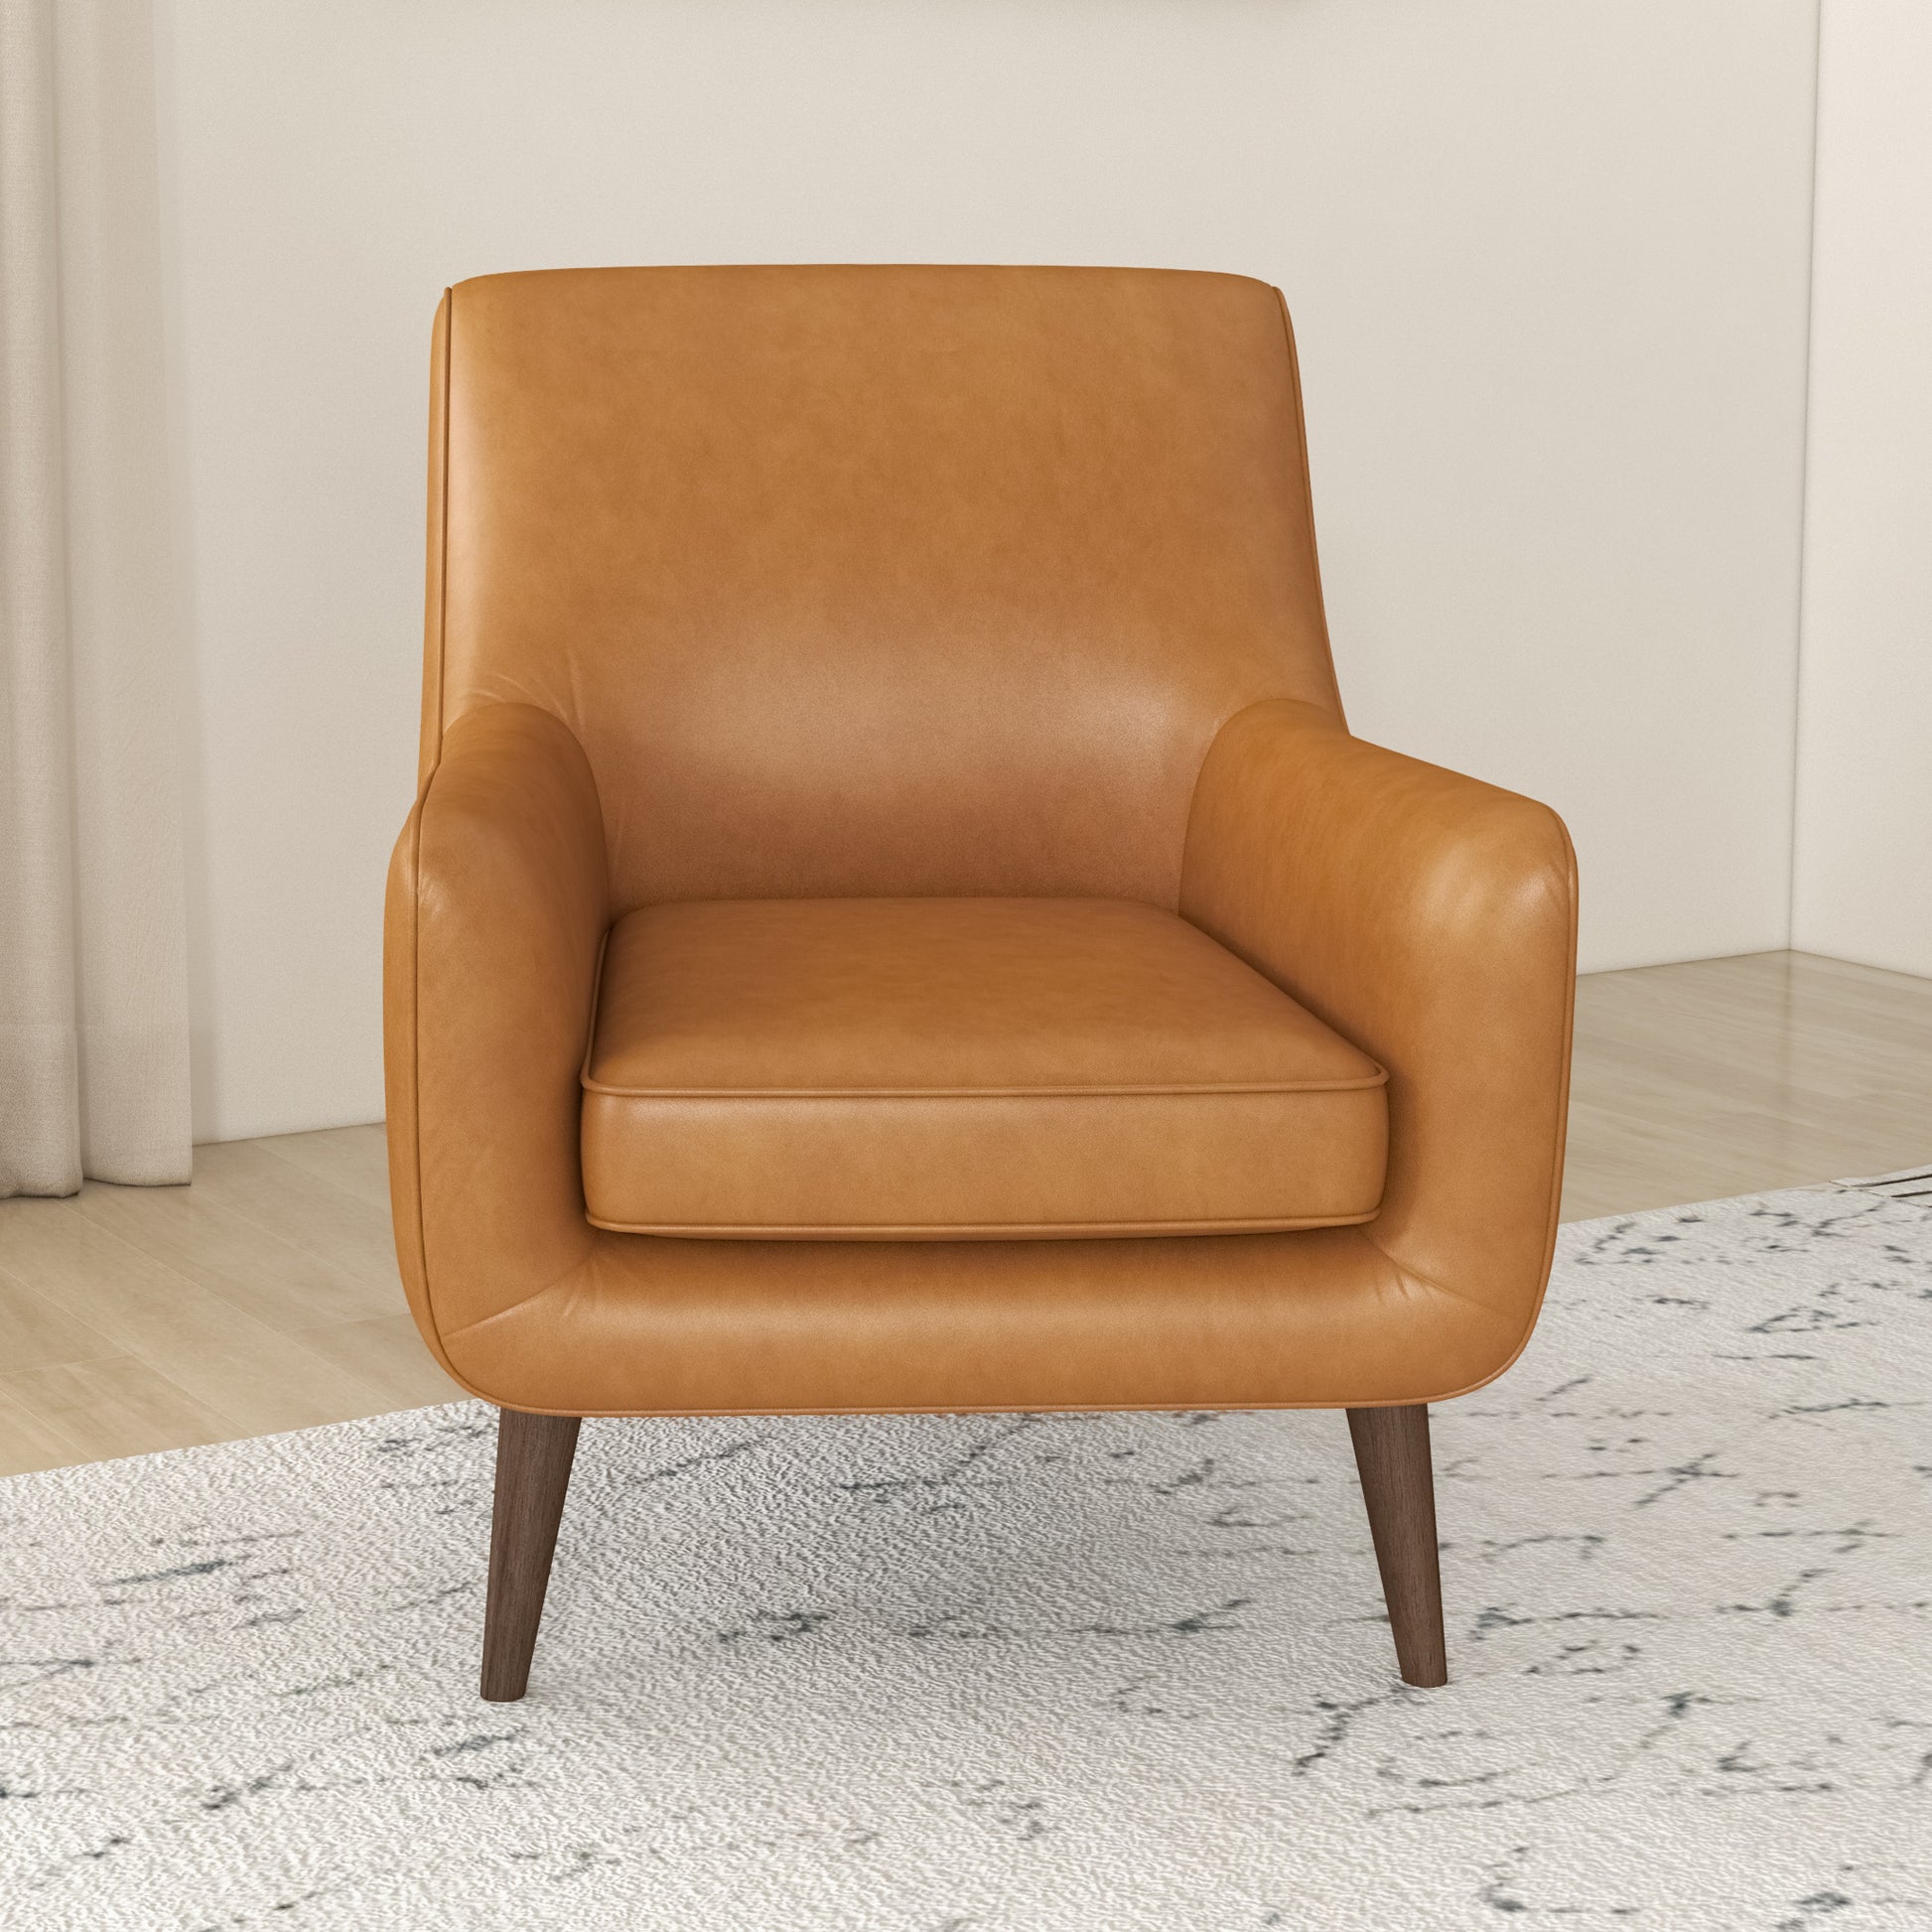 Alex Tan Leather Lounge Chair - Beige Leather